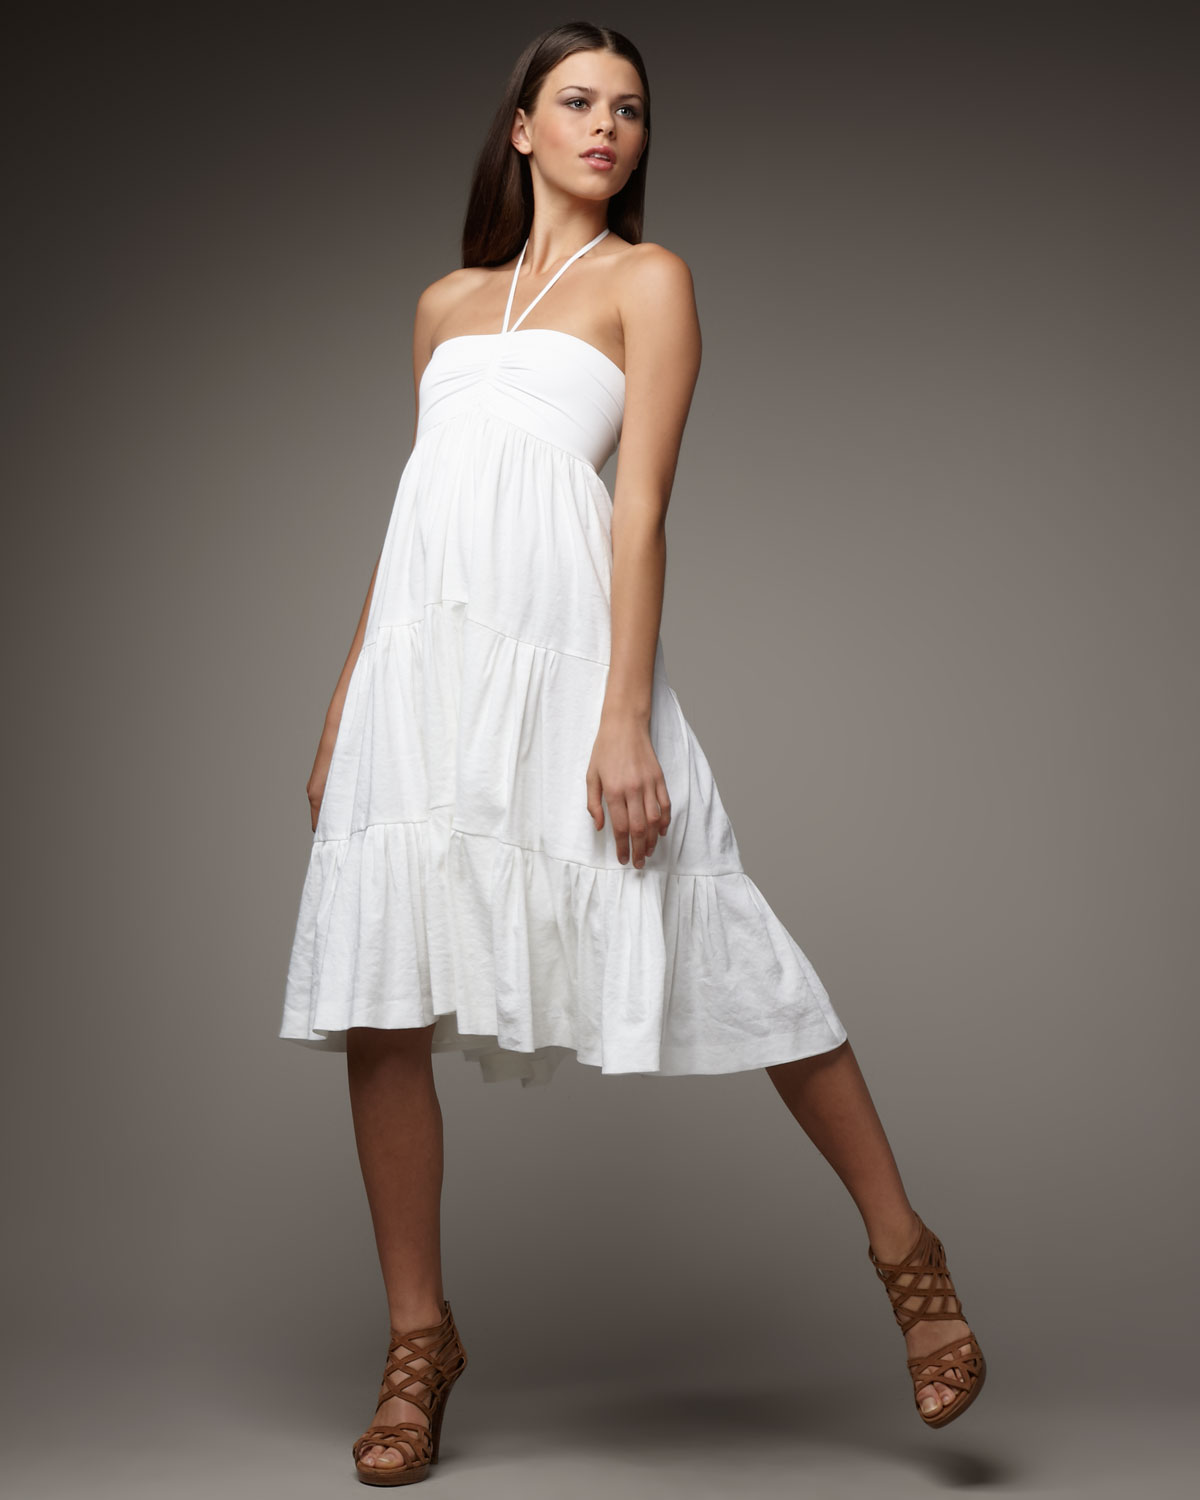 Lyst - Theory Tiered Halter Dress in White